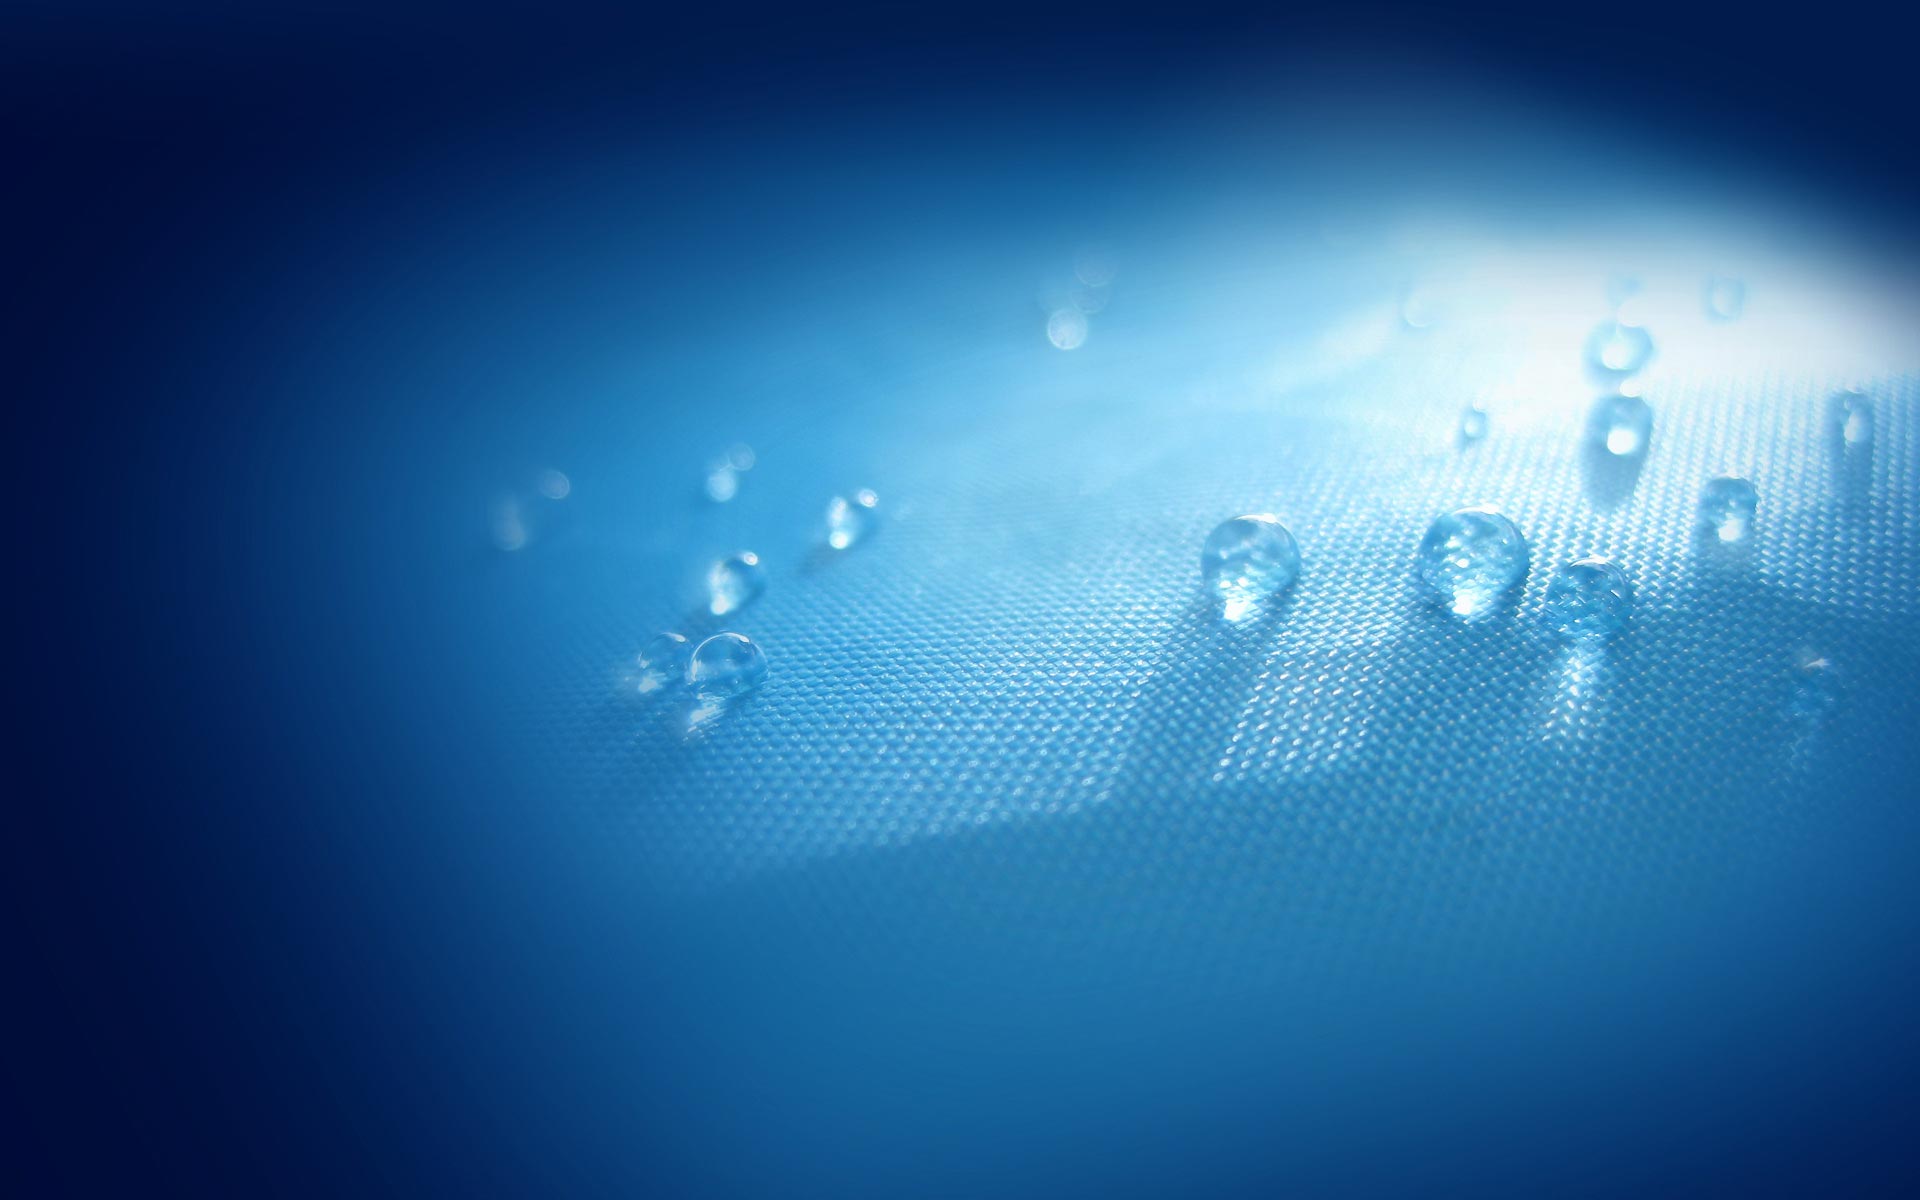 Nice blue background with drops   downloads backgrounds wallpapers